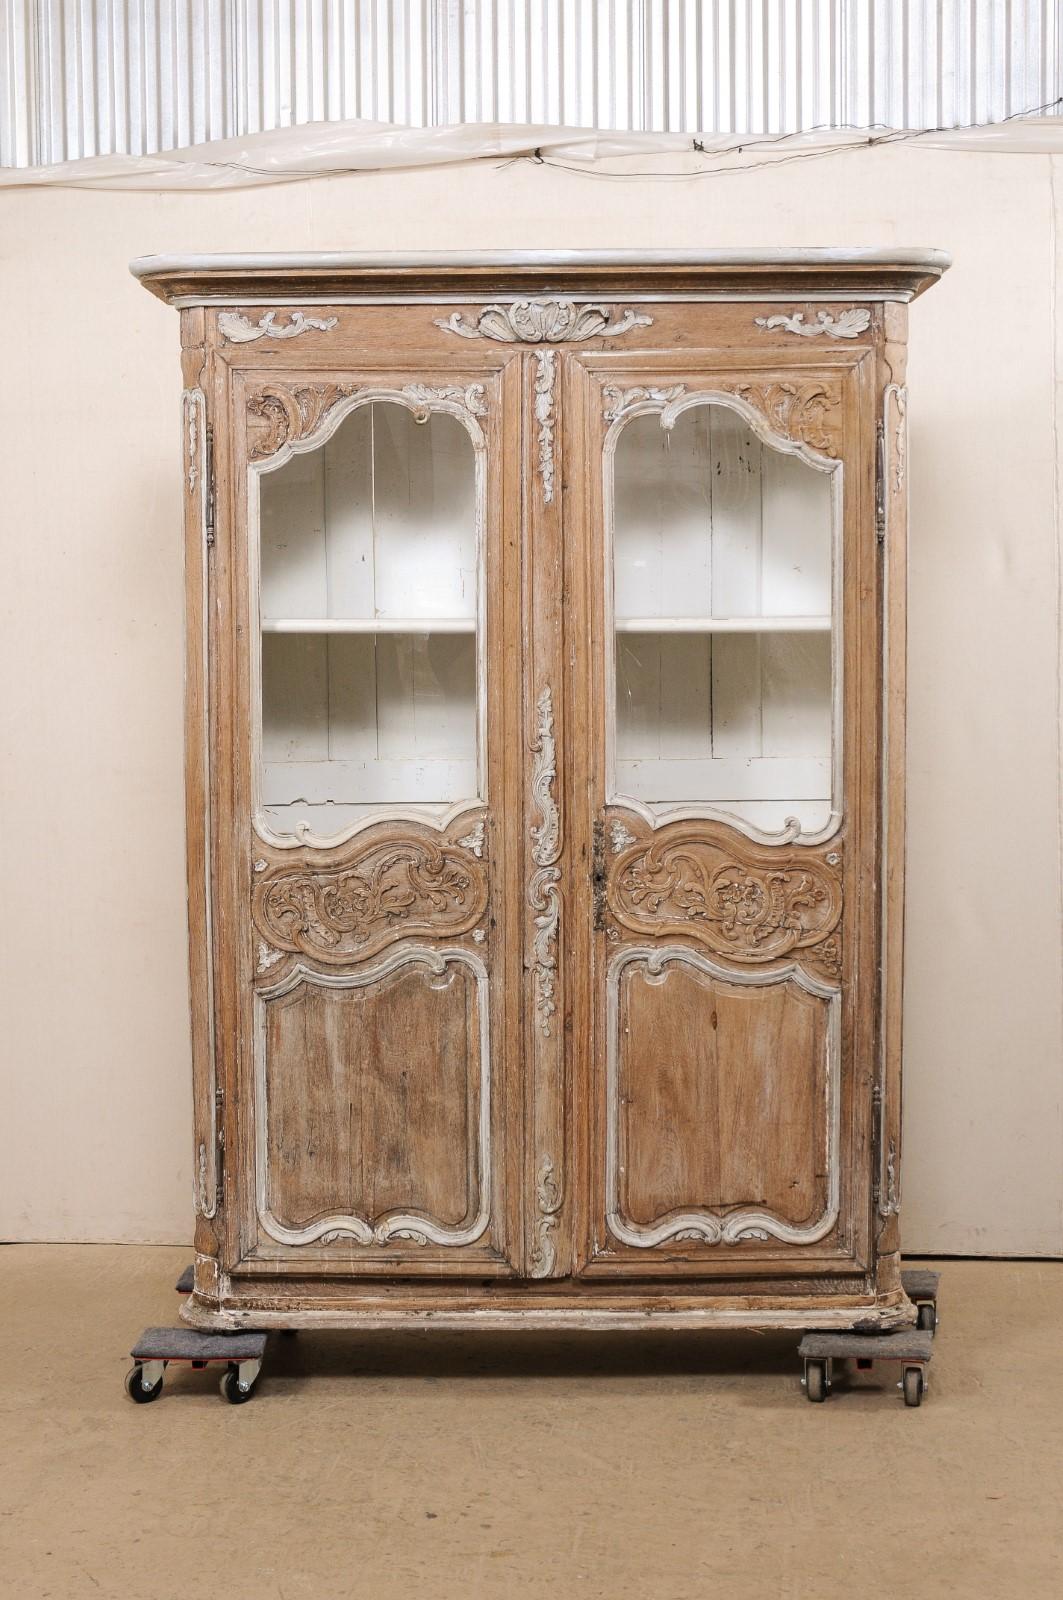 A French tall carved wood and glass panel cabinet from the turn of the 18th and 19th century. This antique cabinet from France, which stands just over 7 feet tall, has been designed with an molded, overhanging cornice, atop a cabinet which houses a